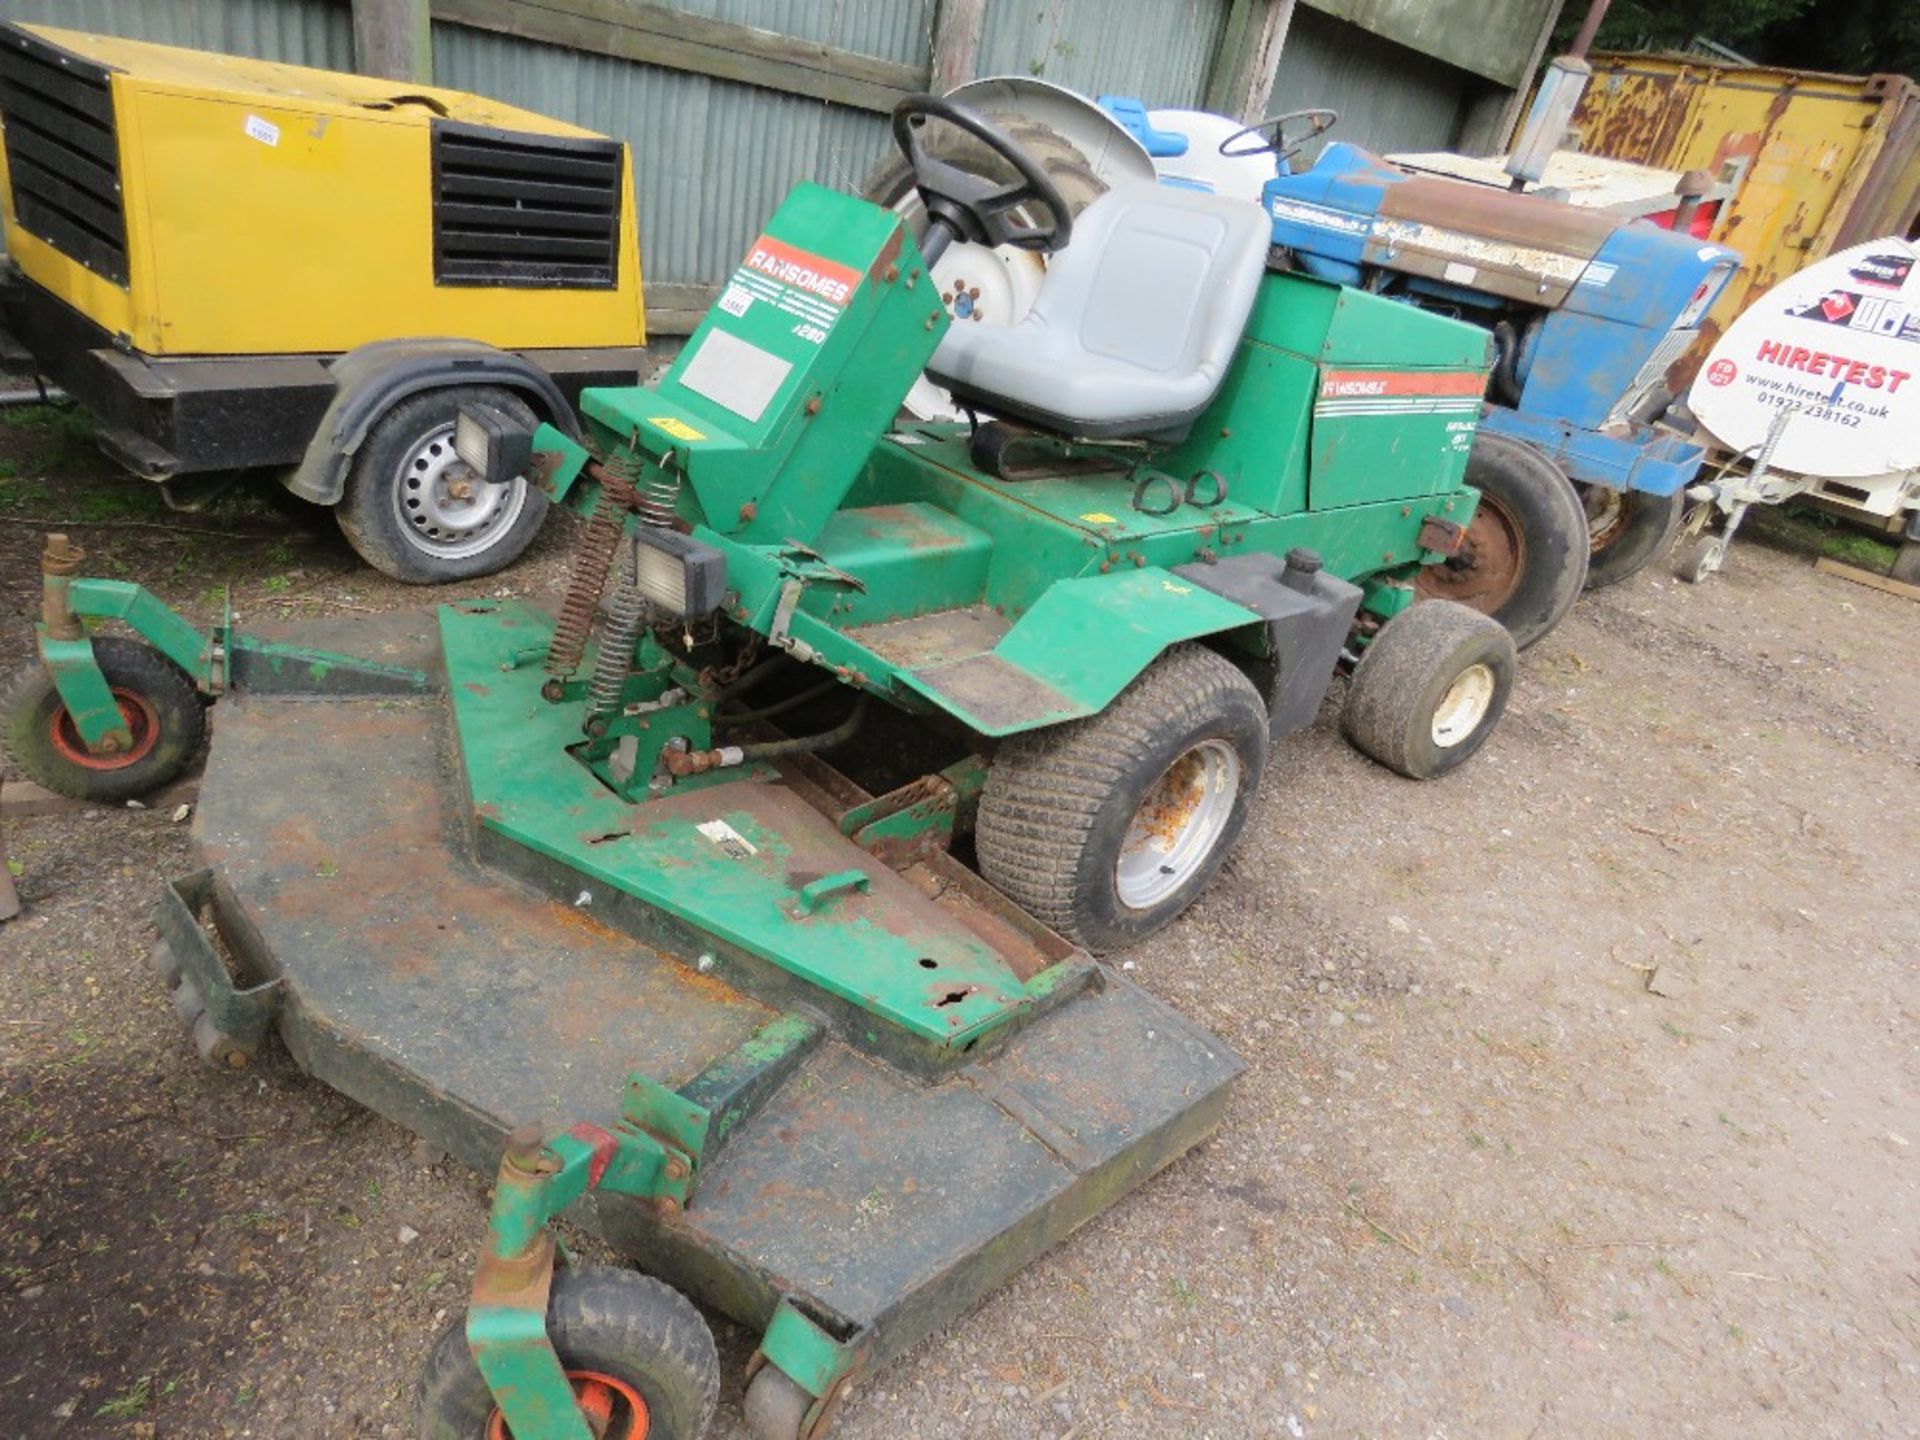 RANSOMES FRONTLINE 728D OUTFRONT RIDE ON MOWER. 4WD. 6FT CUT APPROX. WHEN TESTED WAS SEEN TO RUN AND